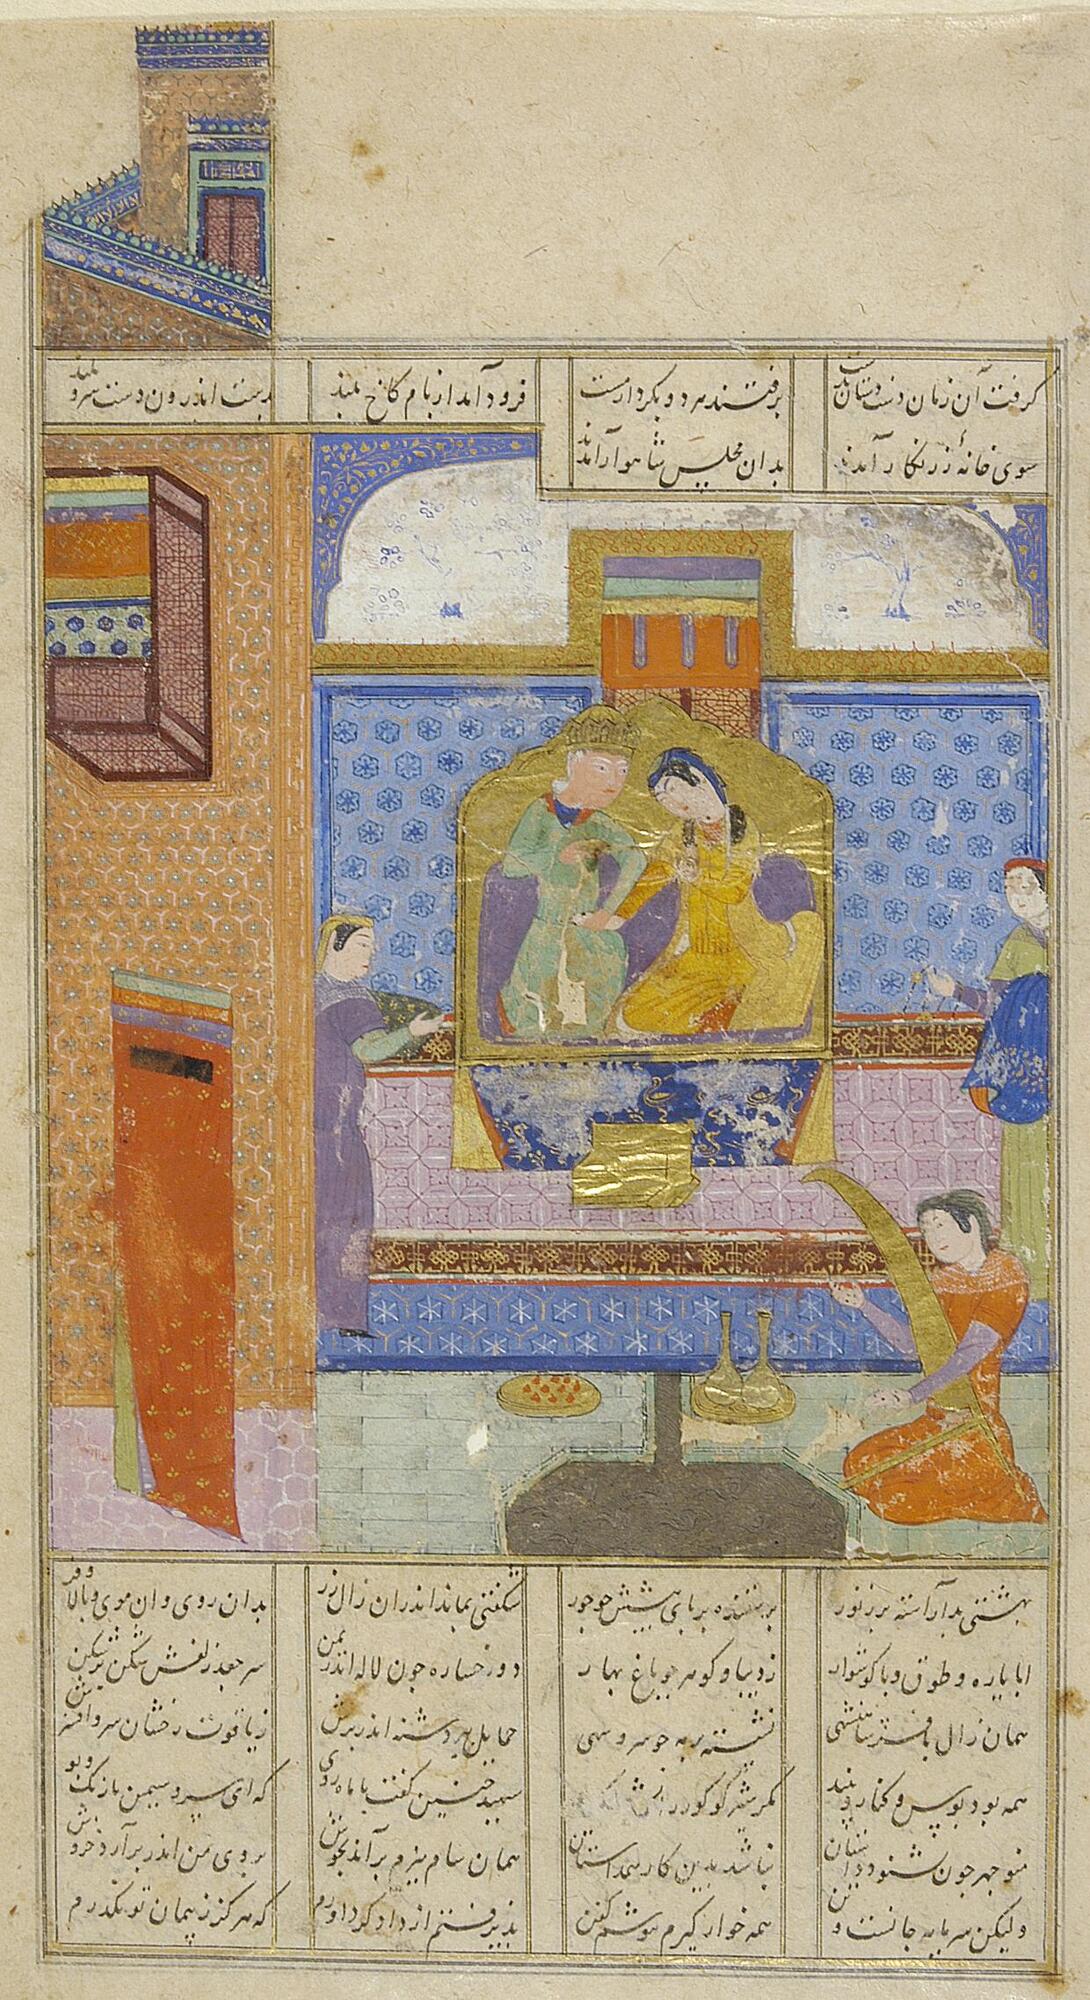 This painted miniature Shahnama page was made by the Shiraz and Timurid schools, ca. 1460 in Baghdad, Iraq. The painting is done in ink, opaque watercolor and gold leaf on paper. The scene shown here is <em>Zal Goes to Rudaba </em>from the Shahnama, the Persian book of kings. 